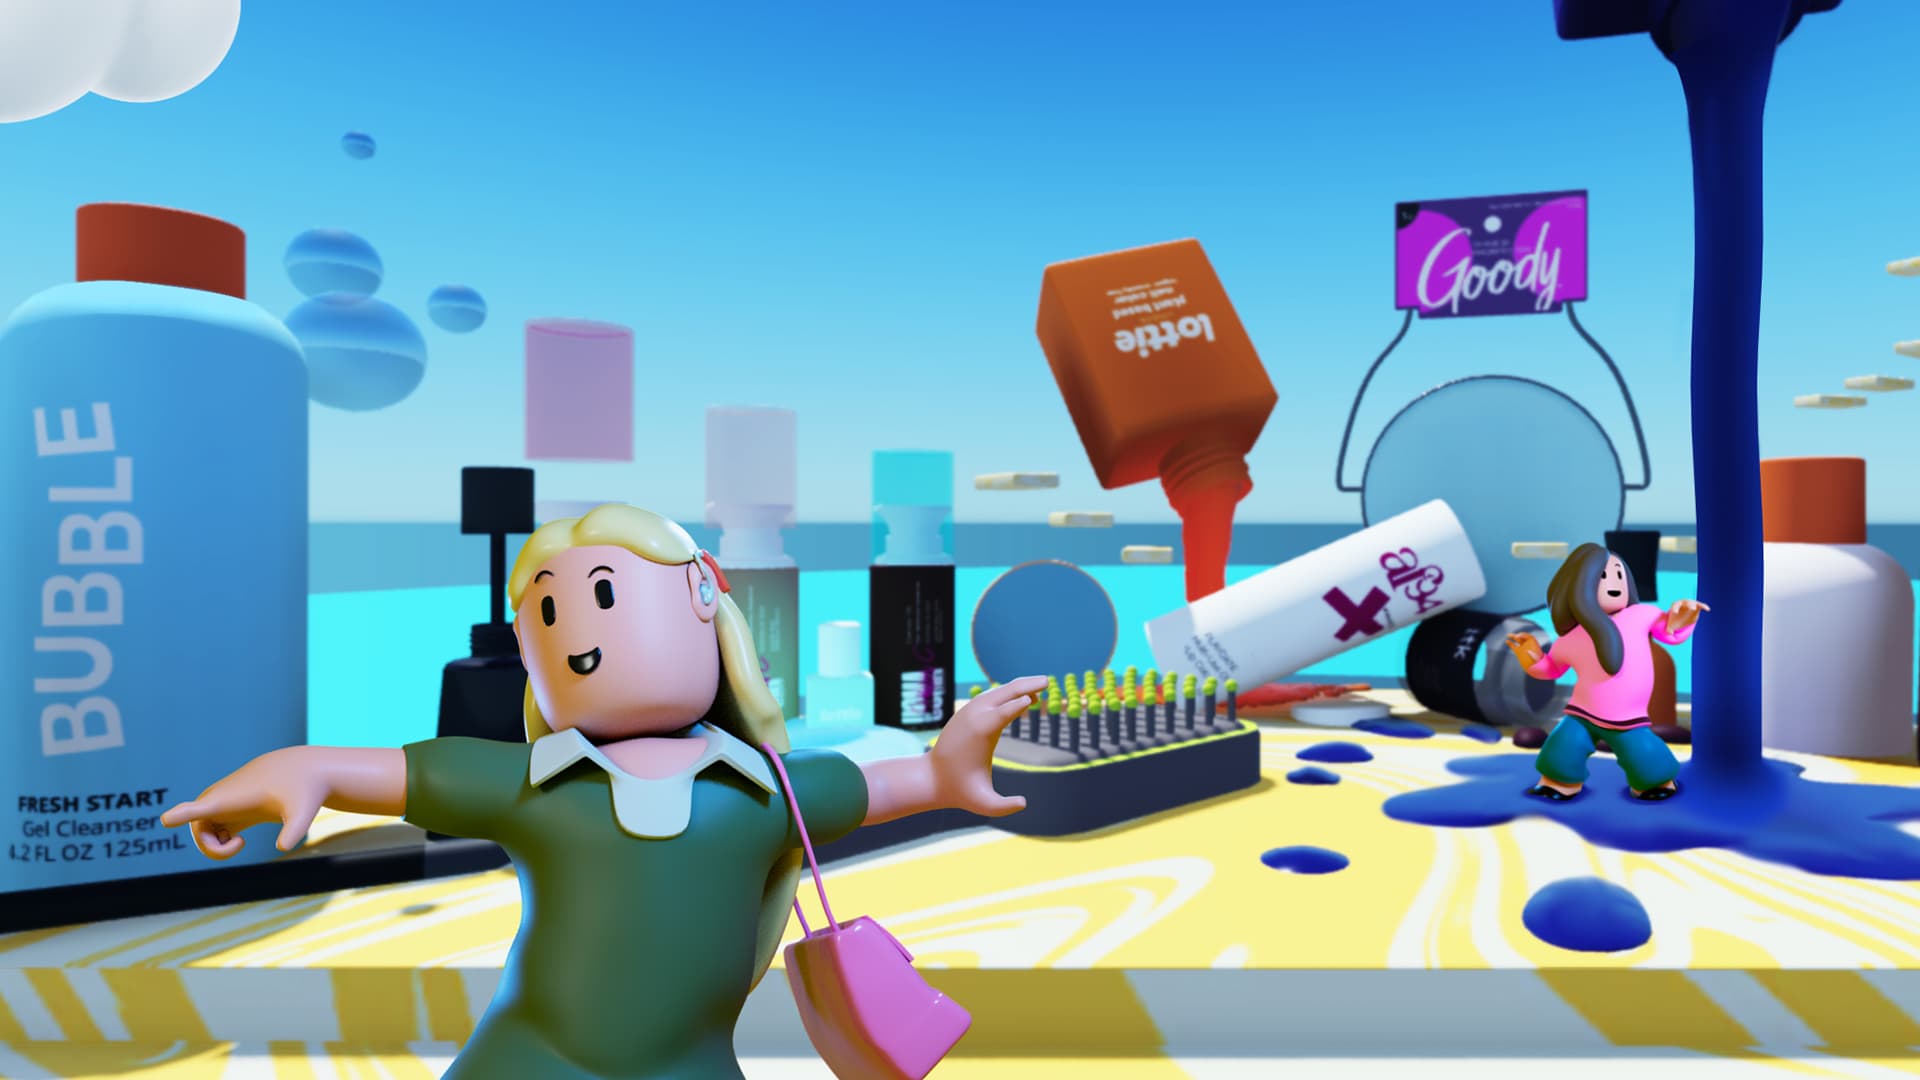 Home Depot Uses Metaverse, Roblox to Try to Appeal to Young Customers